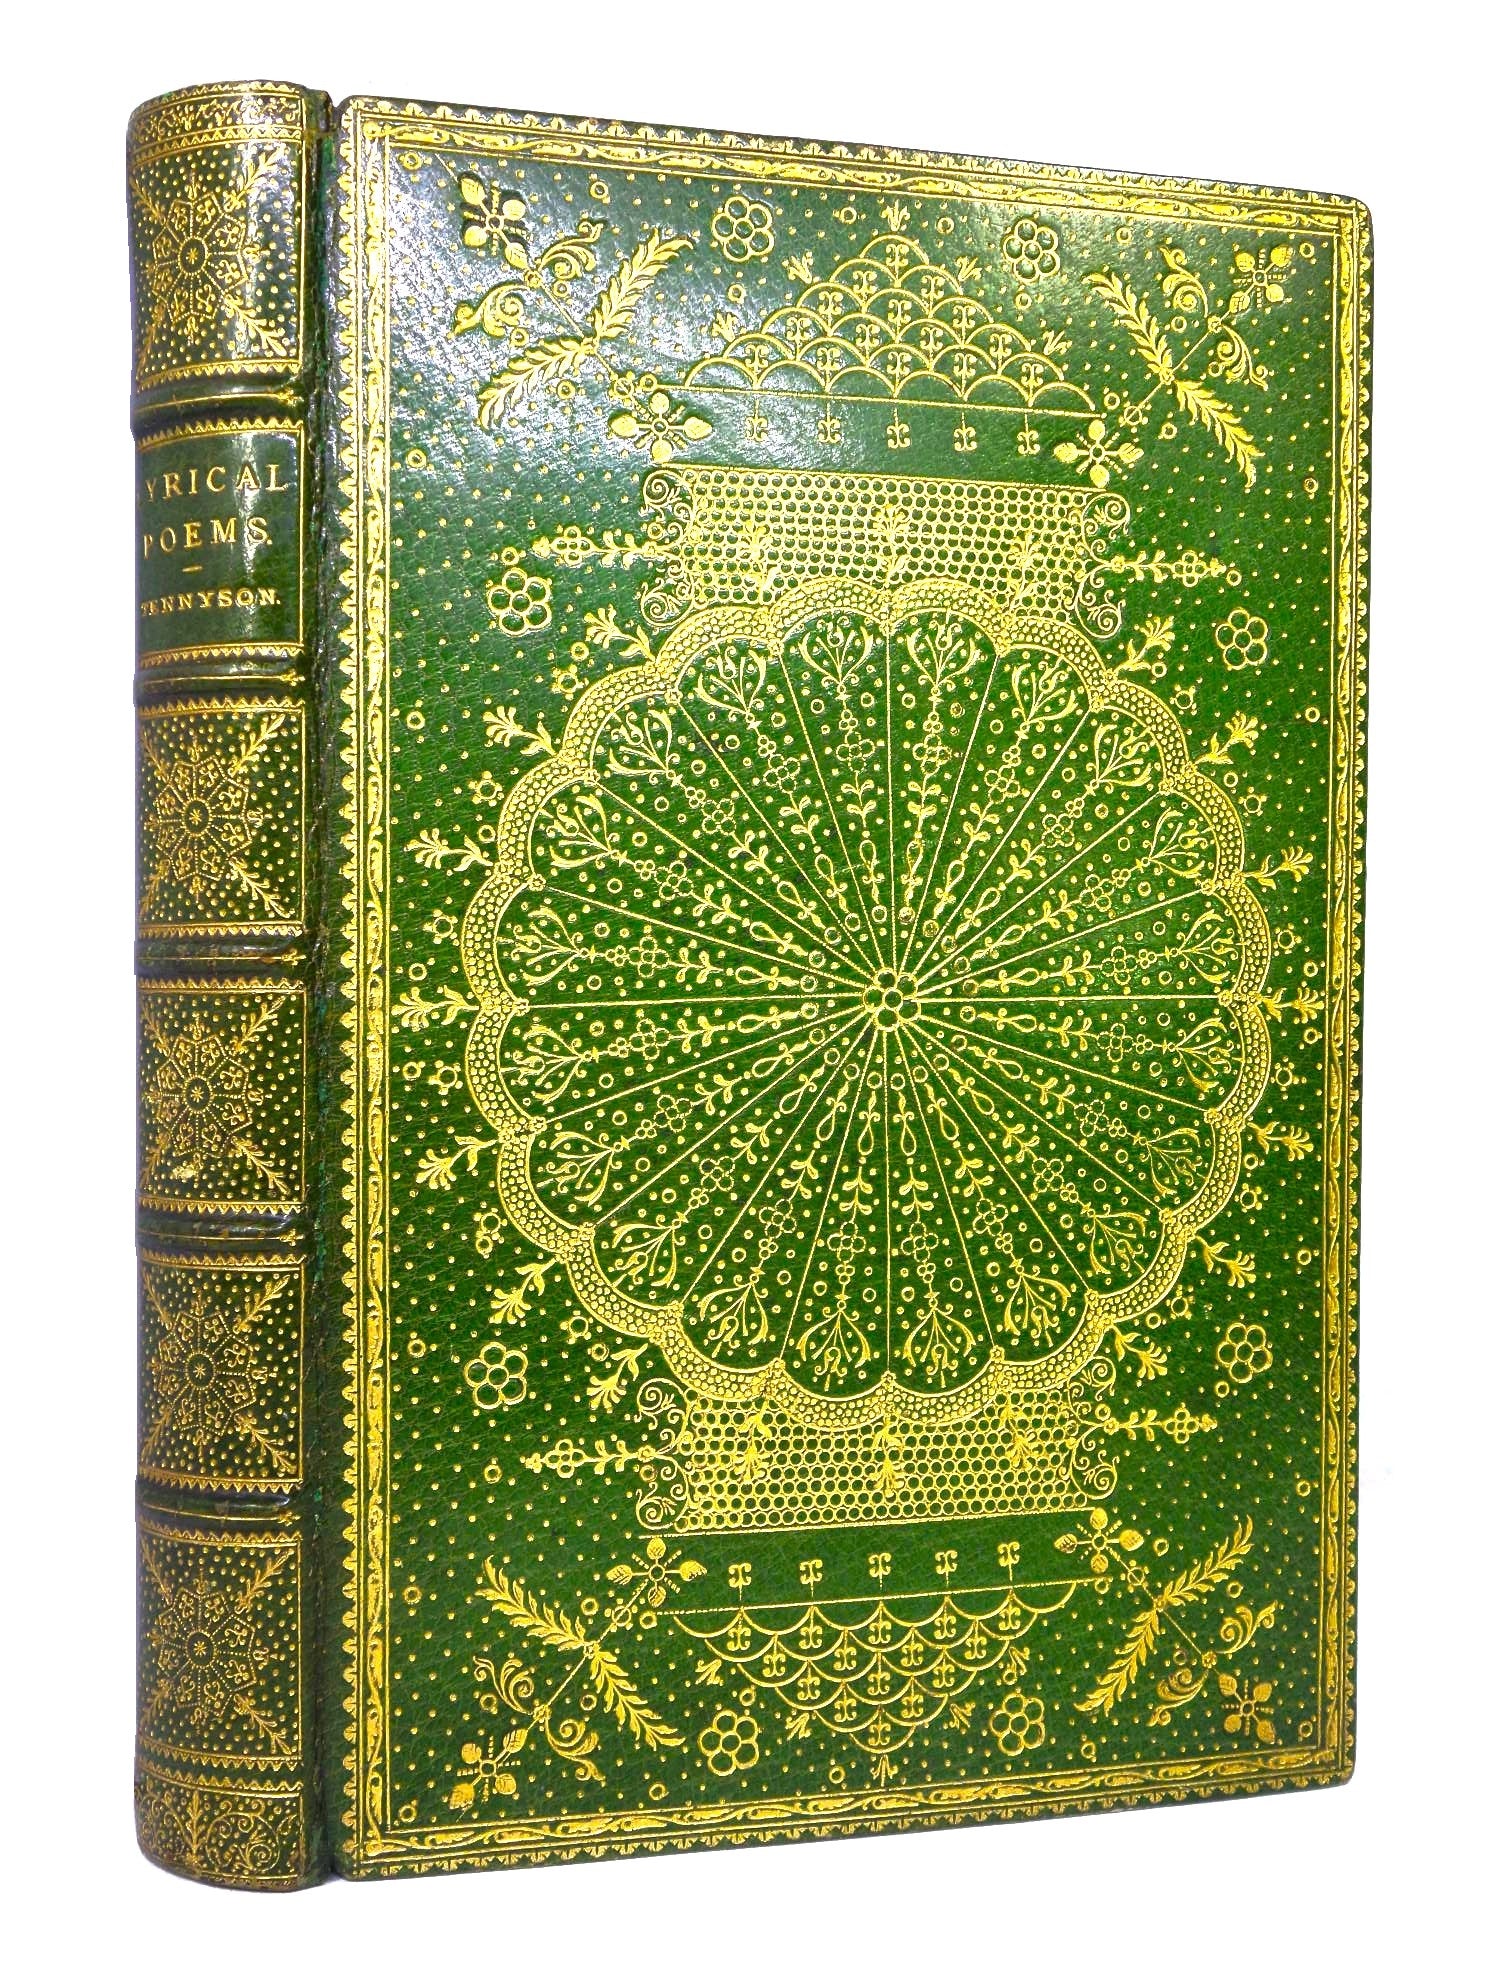 LYRICAL POEMS BY ALFRED LORD TENNYSON 1899 FINE BINDING BY RAMAGE